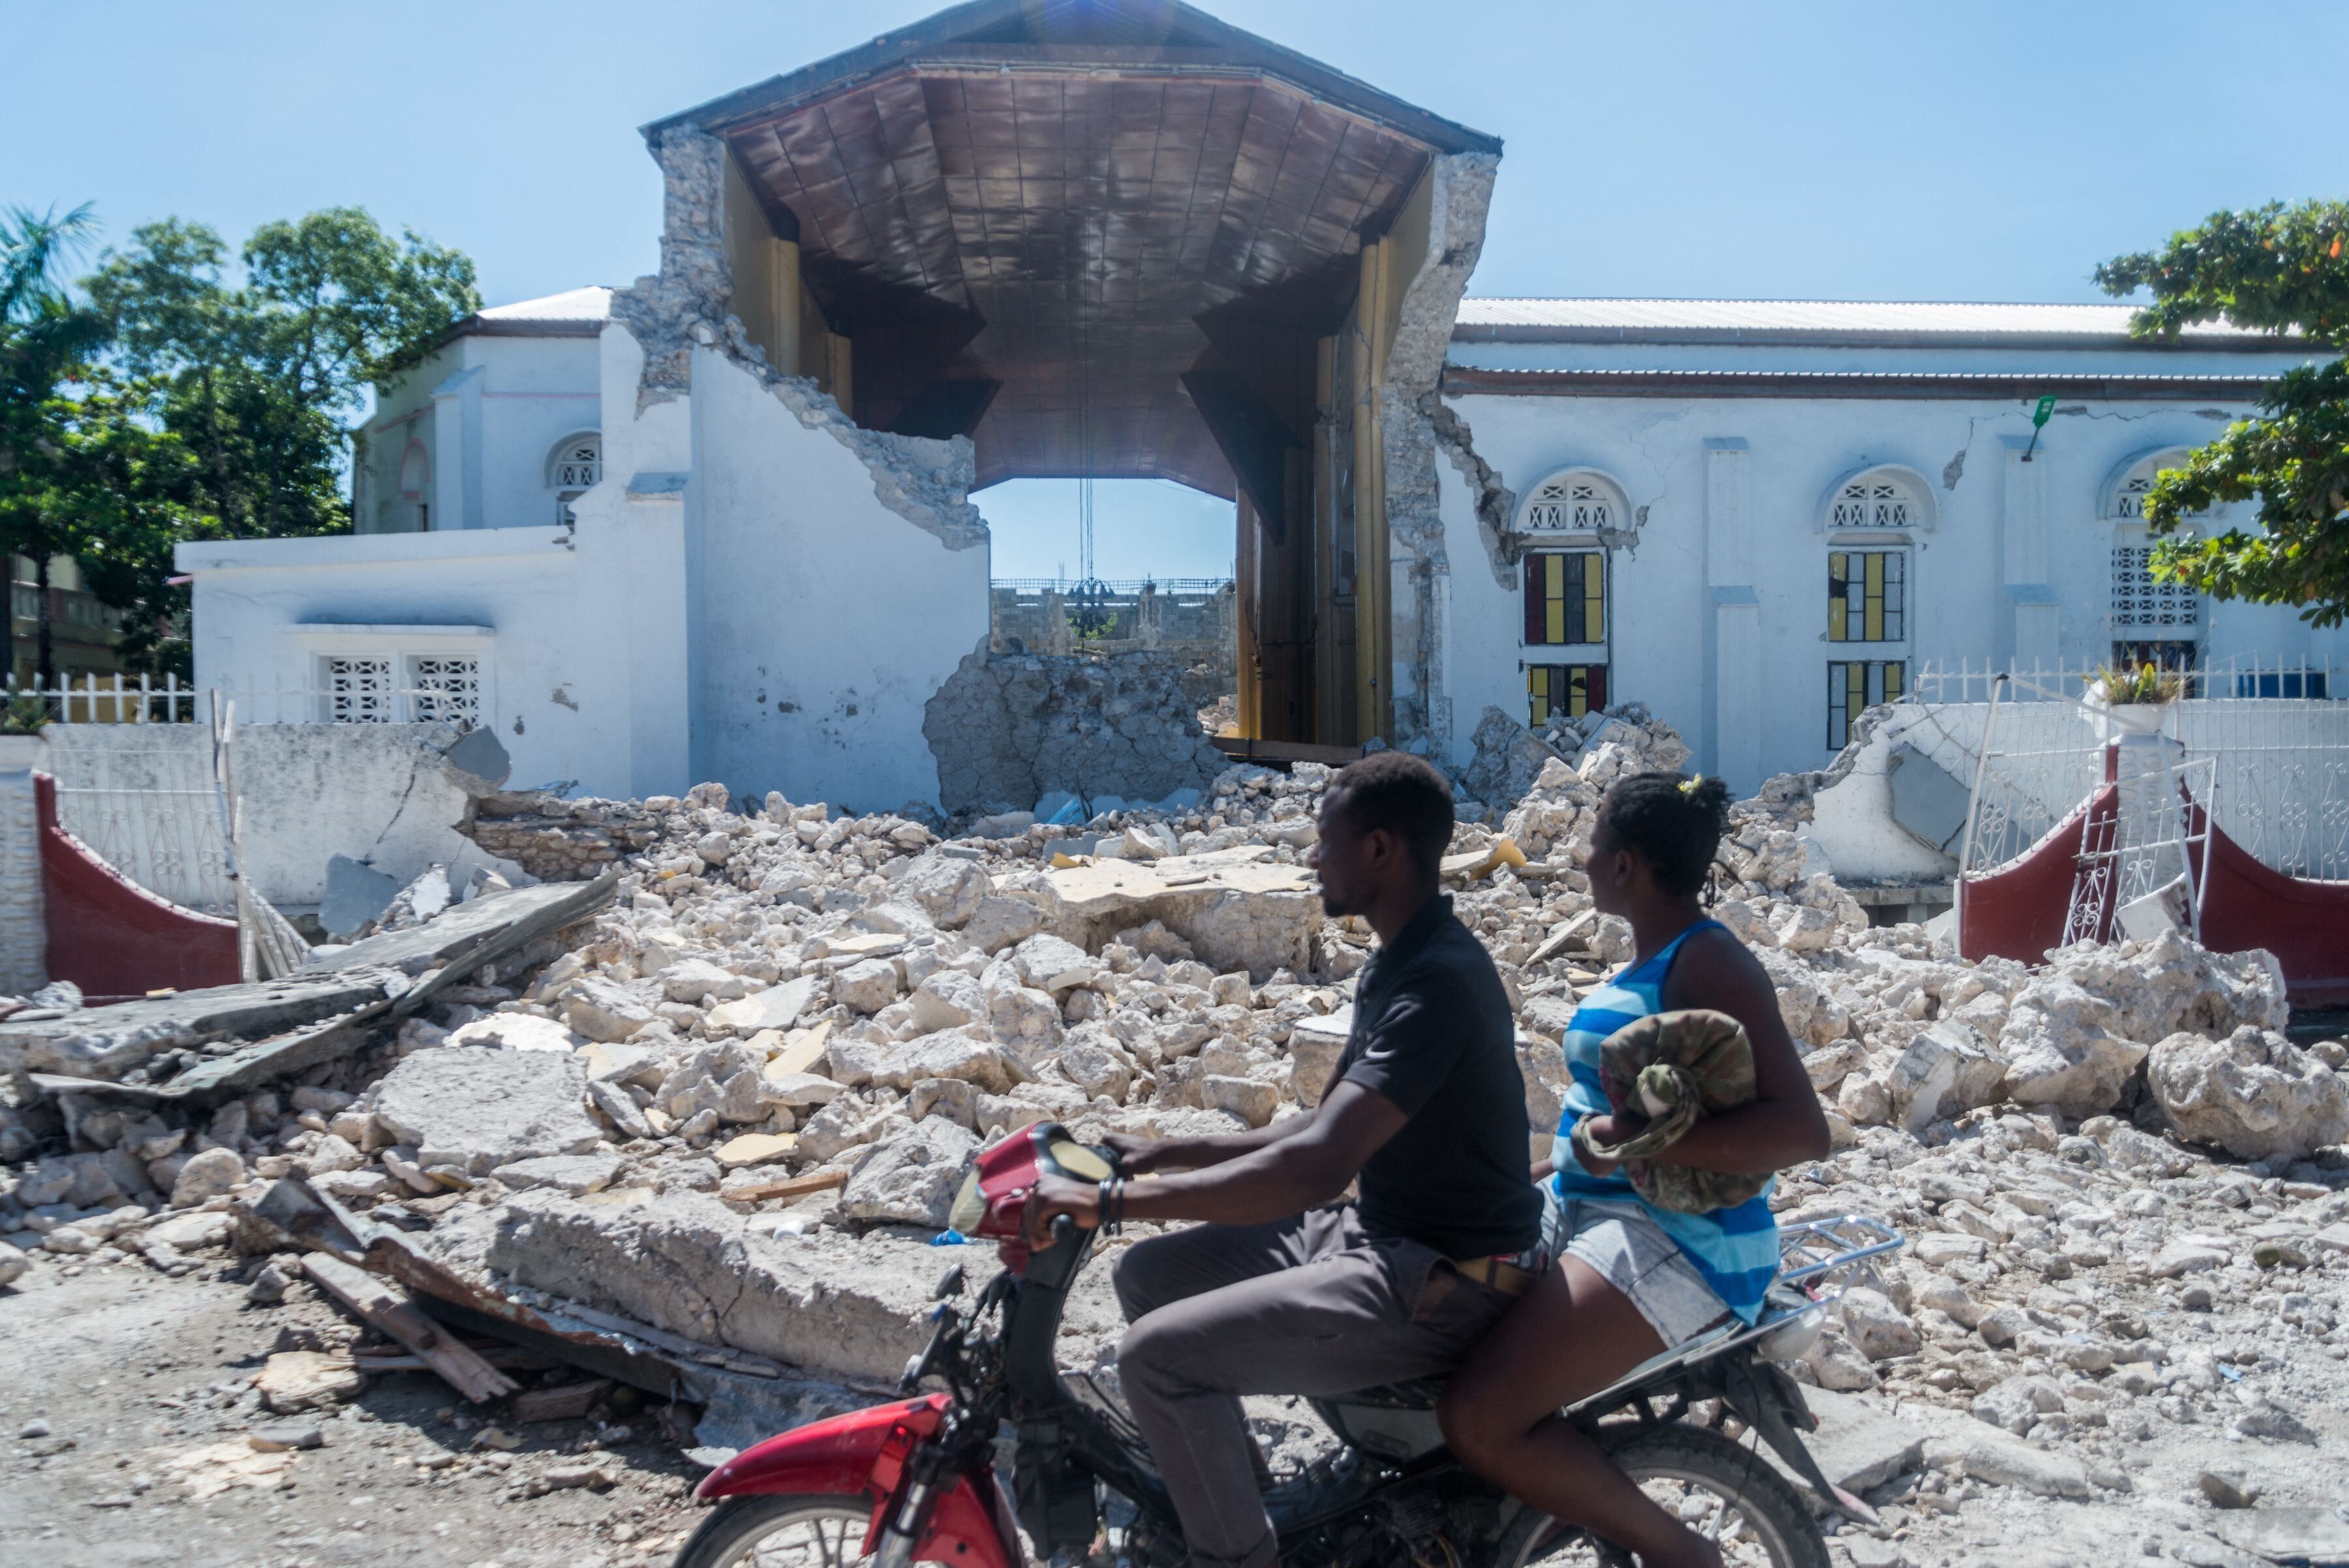 The "Sacr&eacute; coeur des Cayes" church in Les Cayes was destroyed on August 15, 2021, after a 7.2-magnitude earthquake str